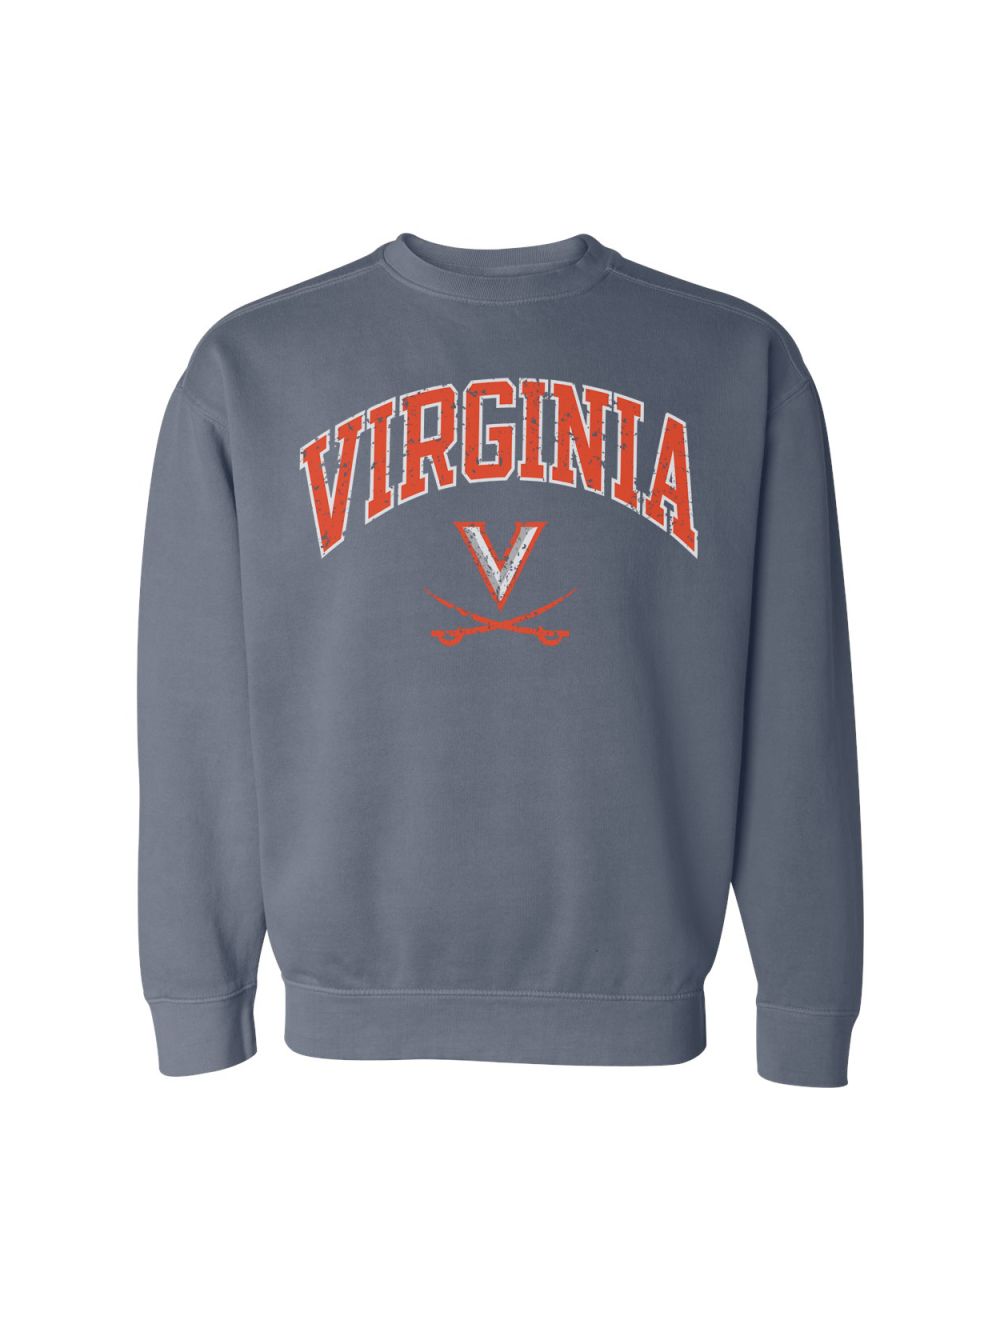 Comfort Colors Navy Garment Dyed Sweatshirt - Mincer's of Charlottesville